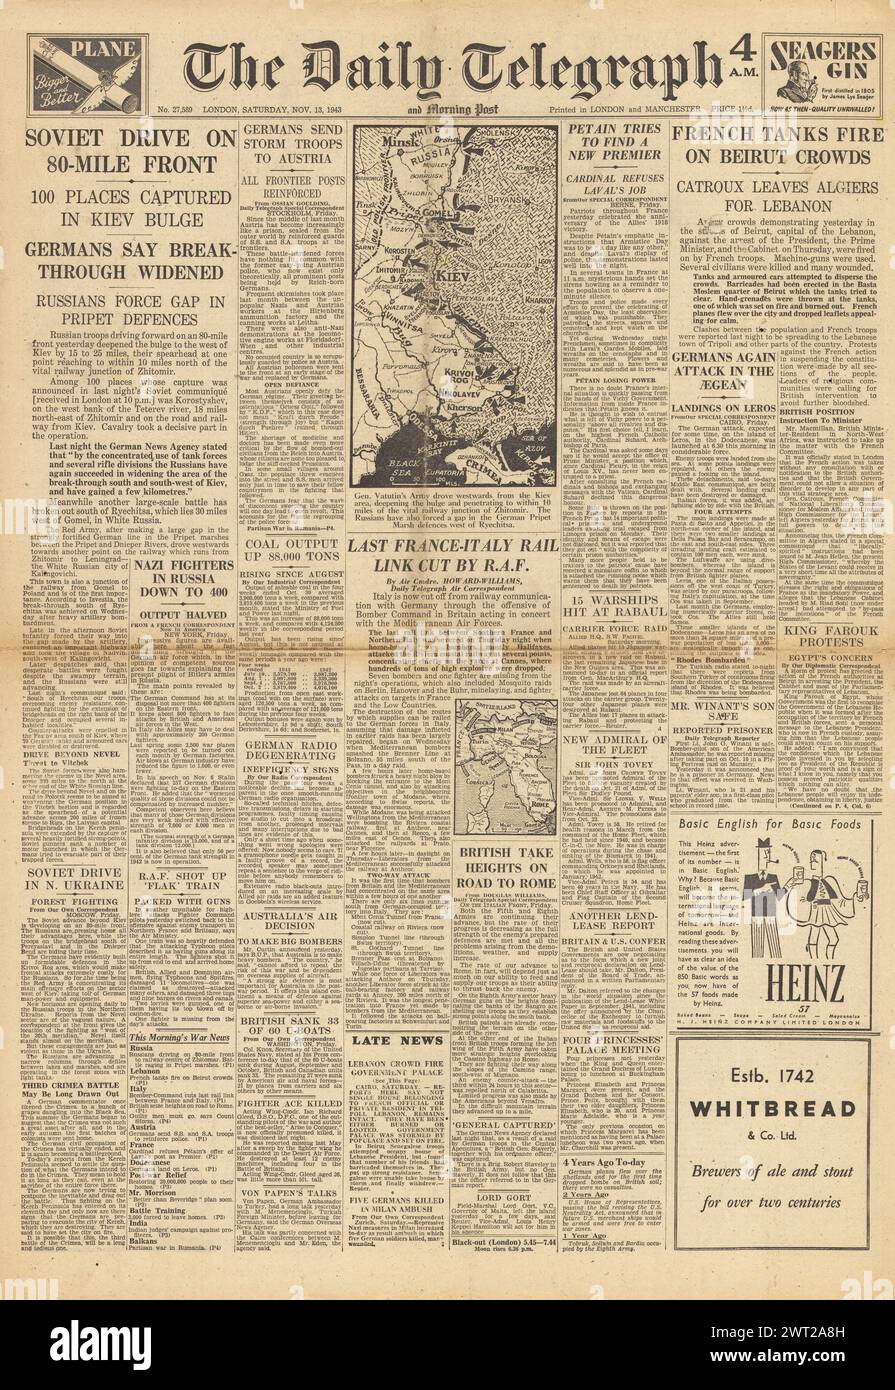 1943 The Daily Telegraph front page reporting Red Army advance on Zhitomir, Civil unrest in Lebanon and Allied bombing raids on Italian French border Stock Photo